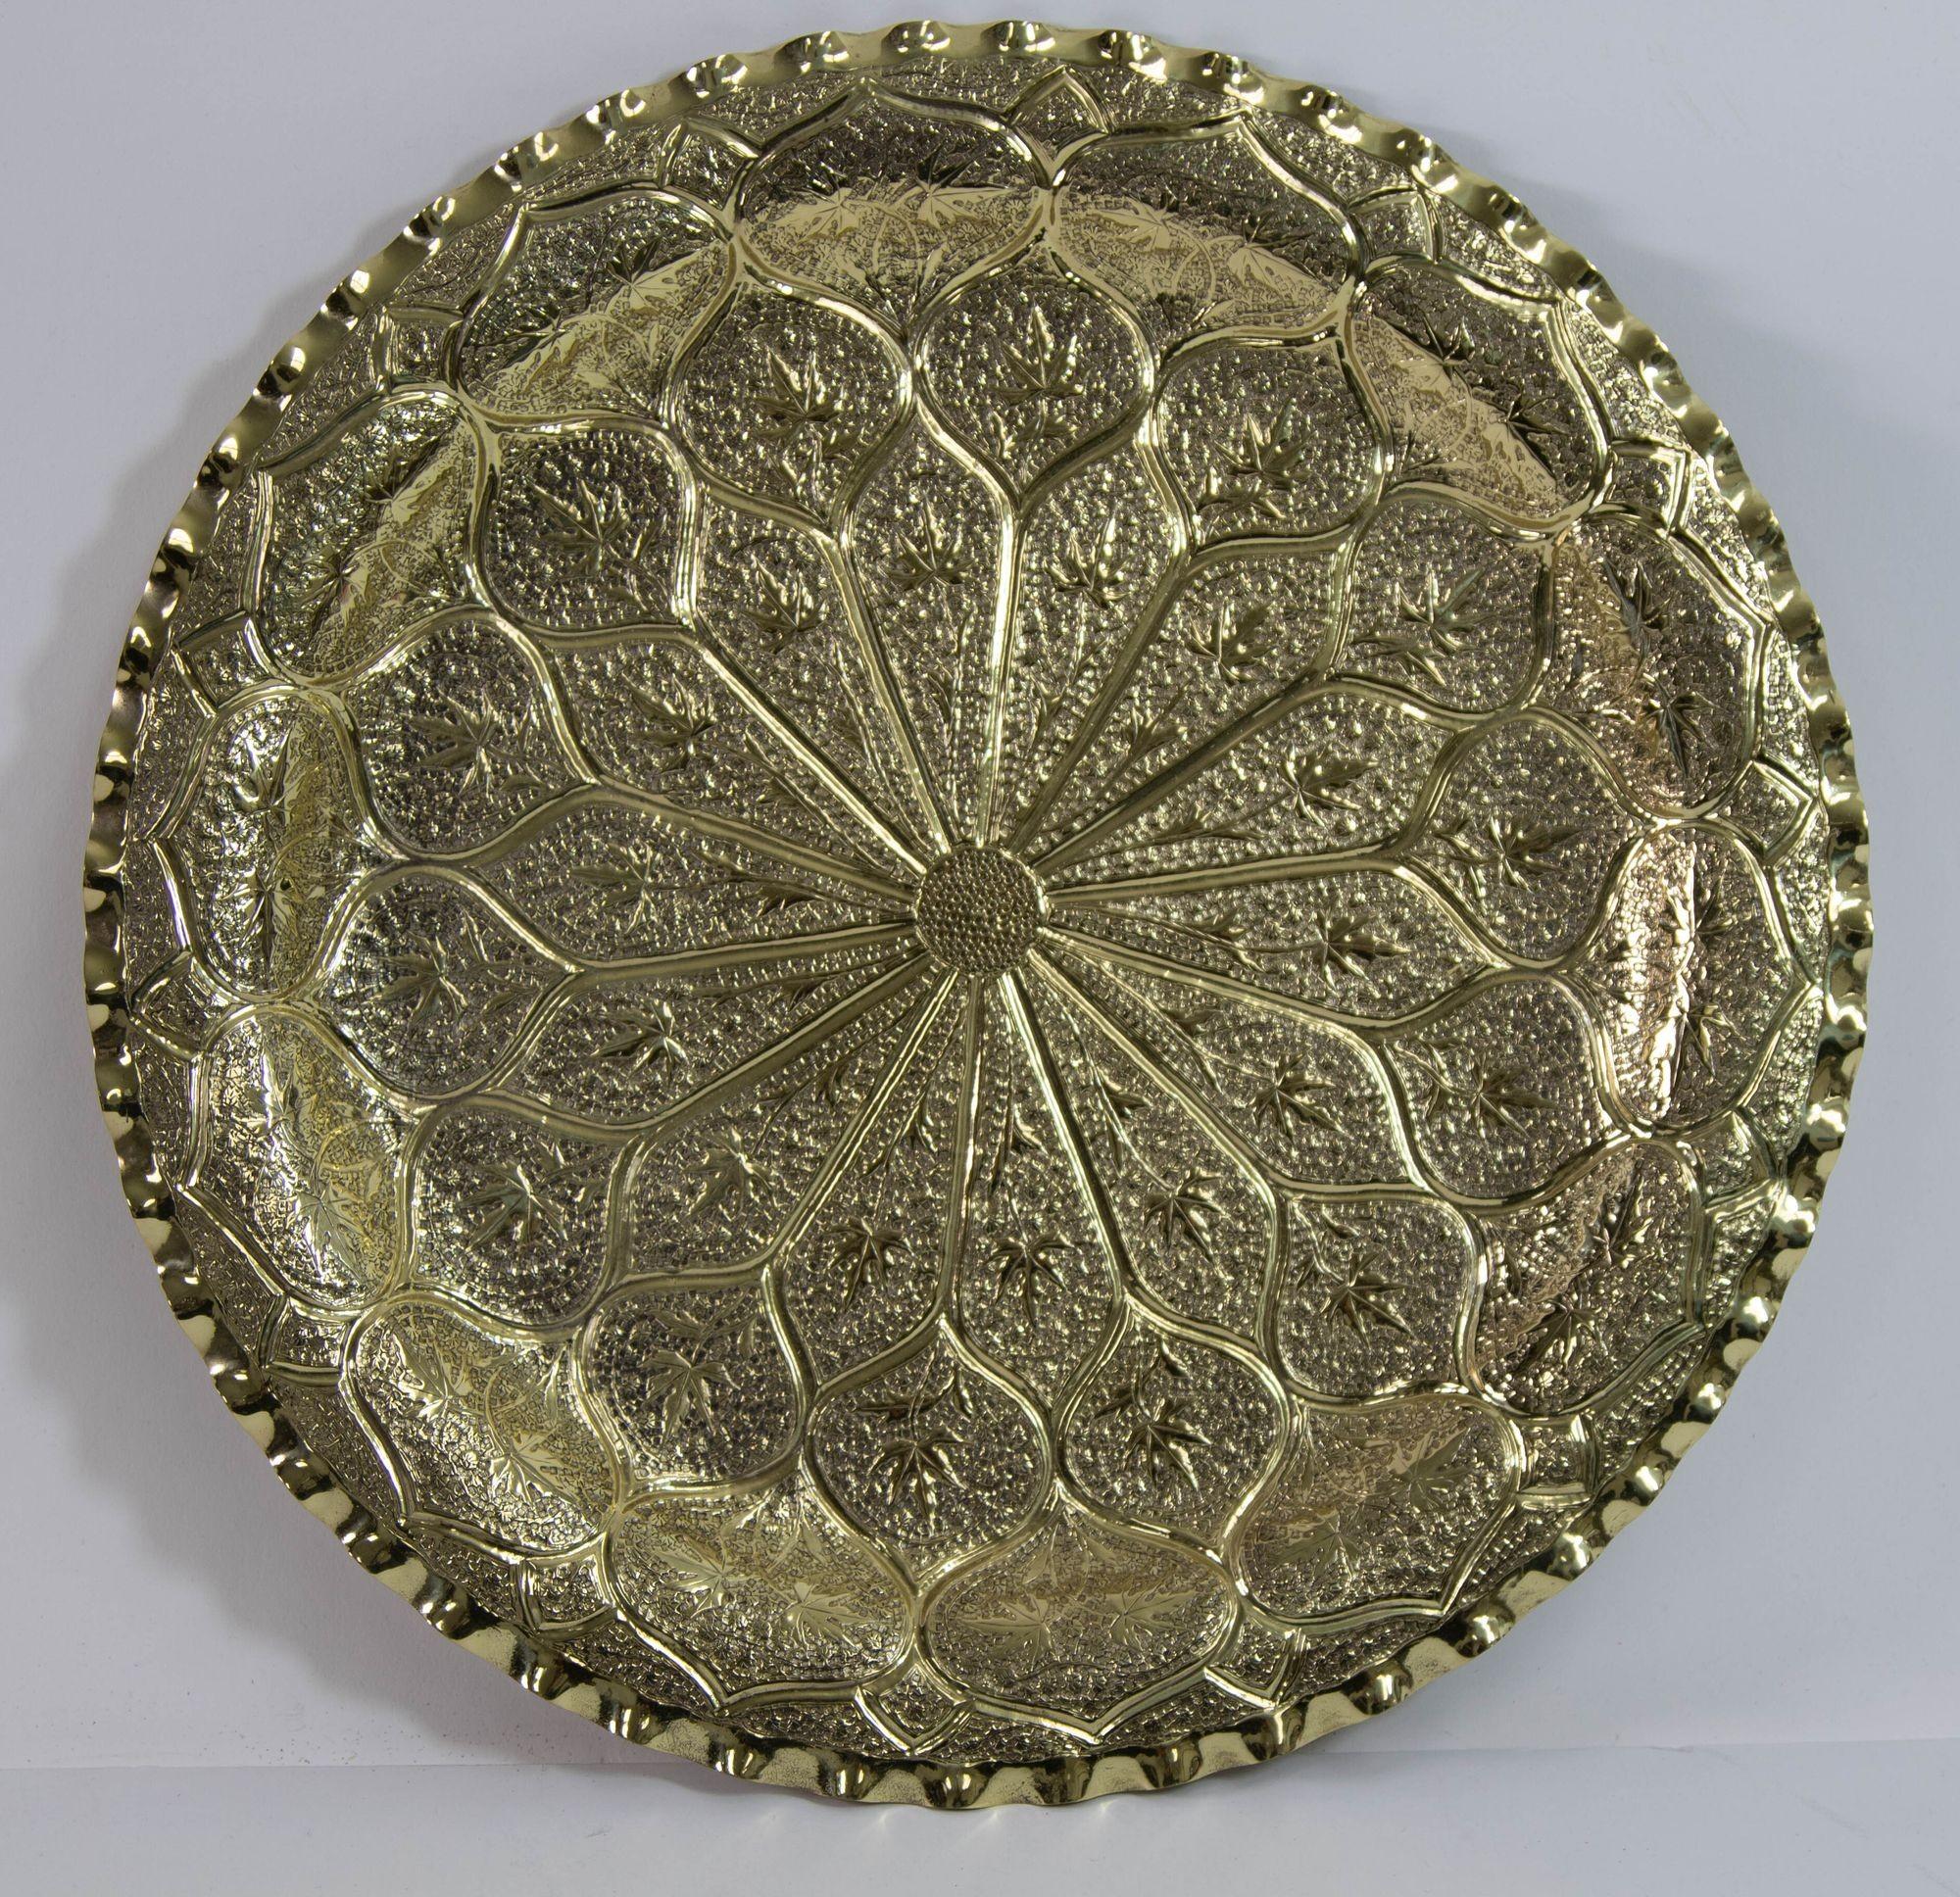 Antique 1940s Moroccan Brass Tray Hand Hammered with Moorish design, Islamic Metalwork.
Dimension: 13 inches Diameter.
This antique 1940s Moroccan polished brass tray is a collectible Islamic Metalwork Platter.
The Islamic polished brass metalwork,